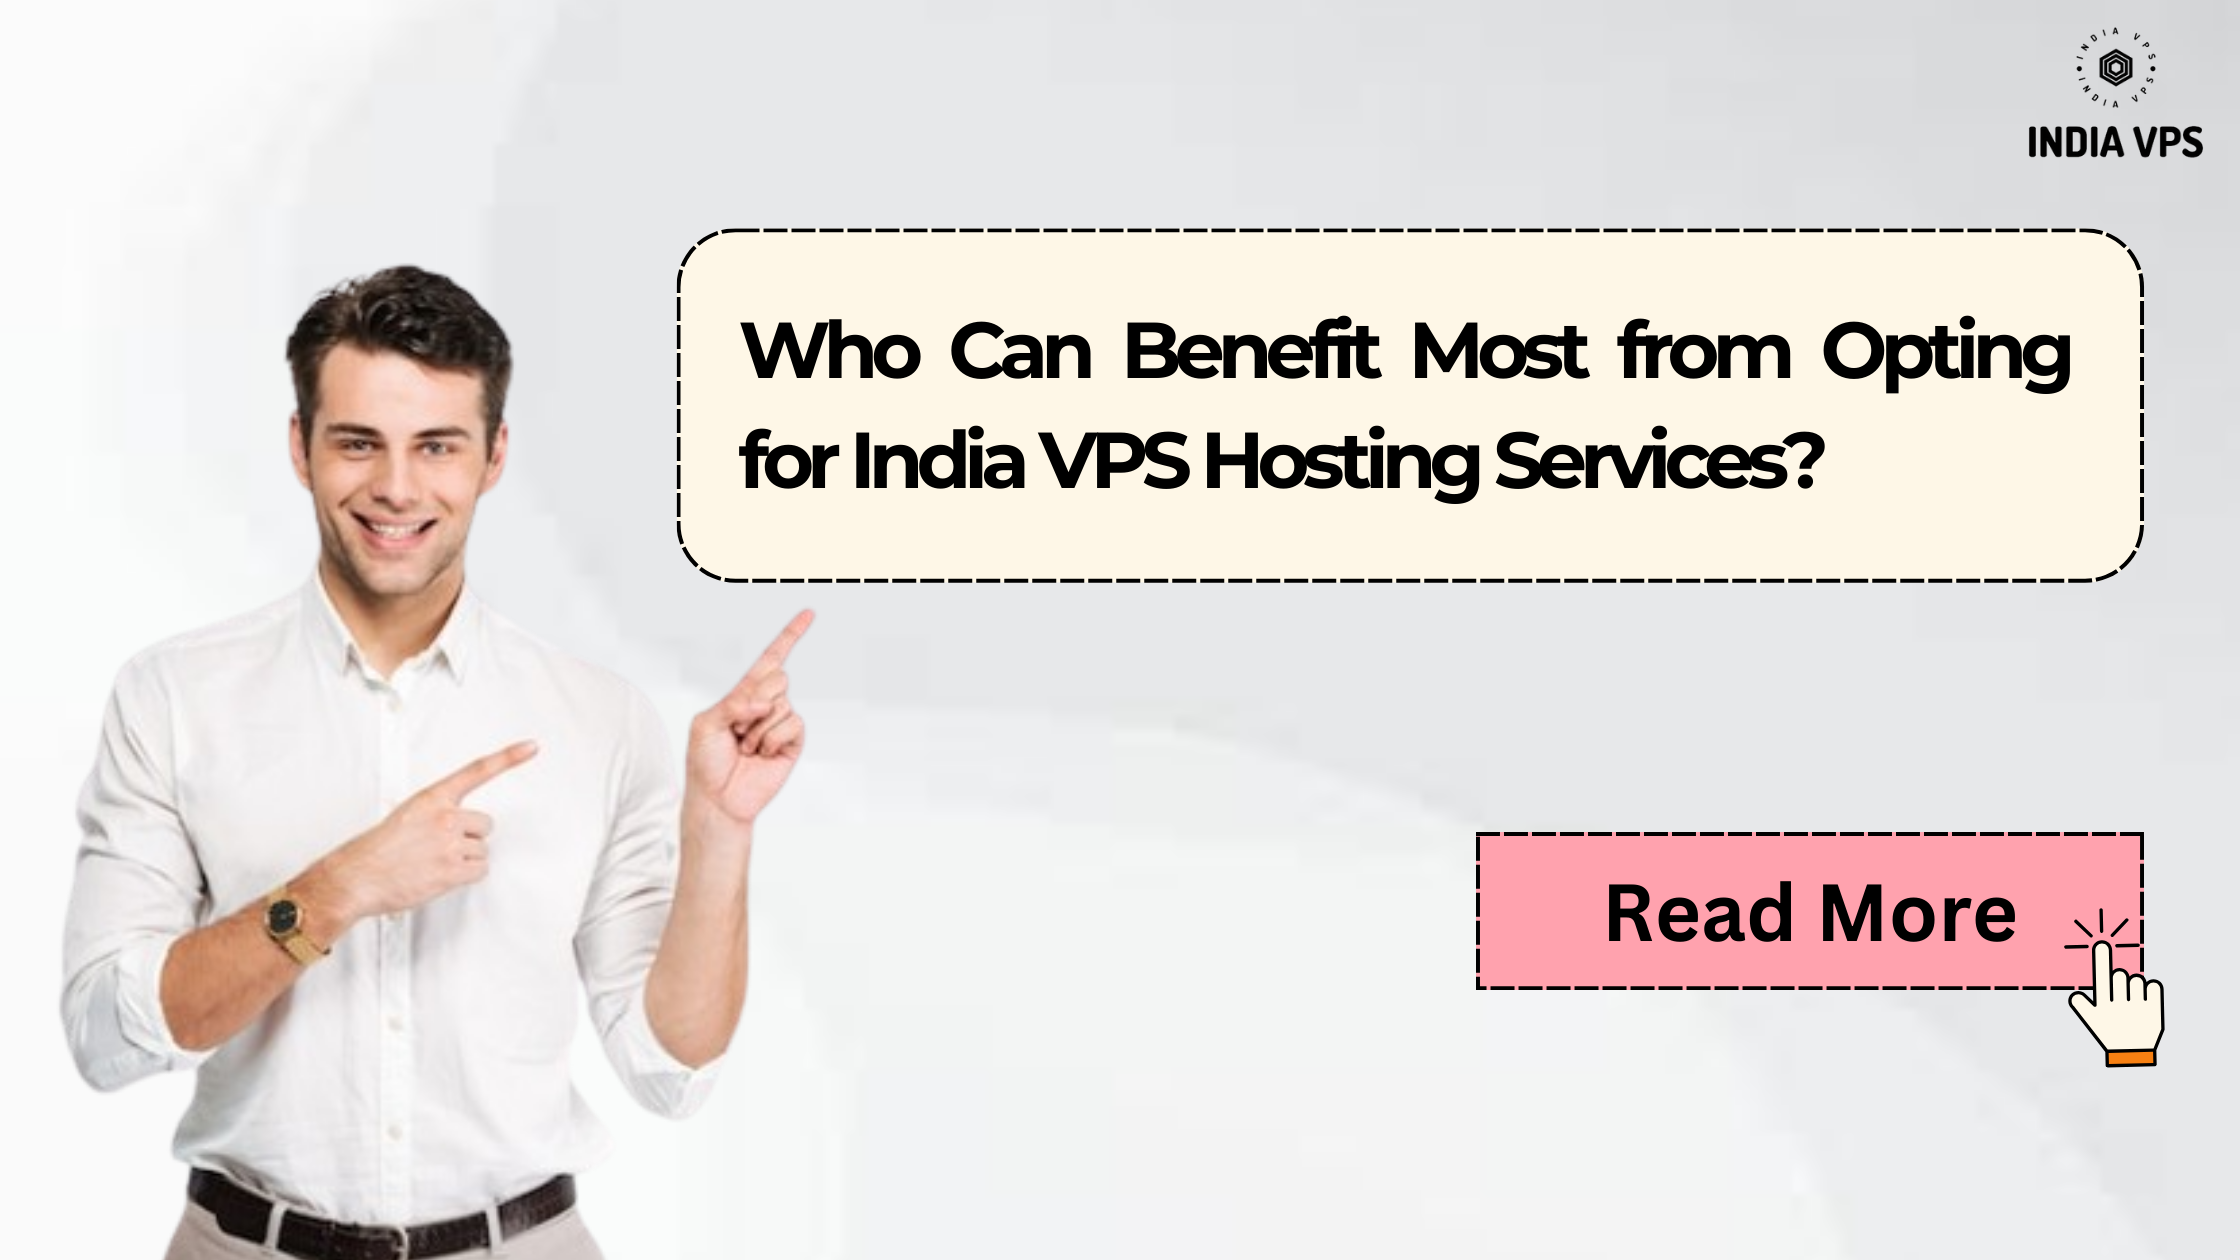 Who Can Benefit Most from Opting for India VPS Hosting Services?